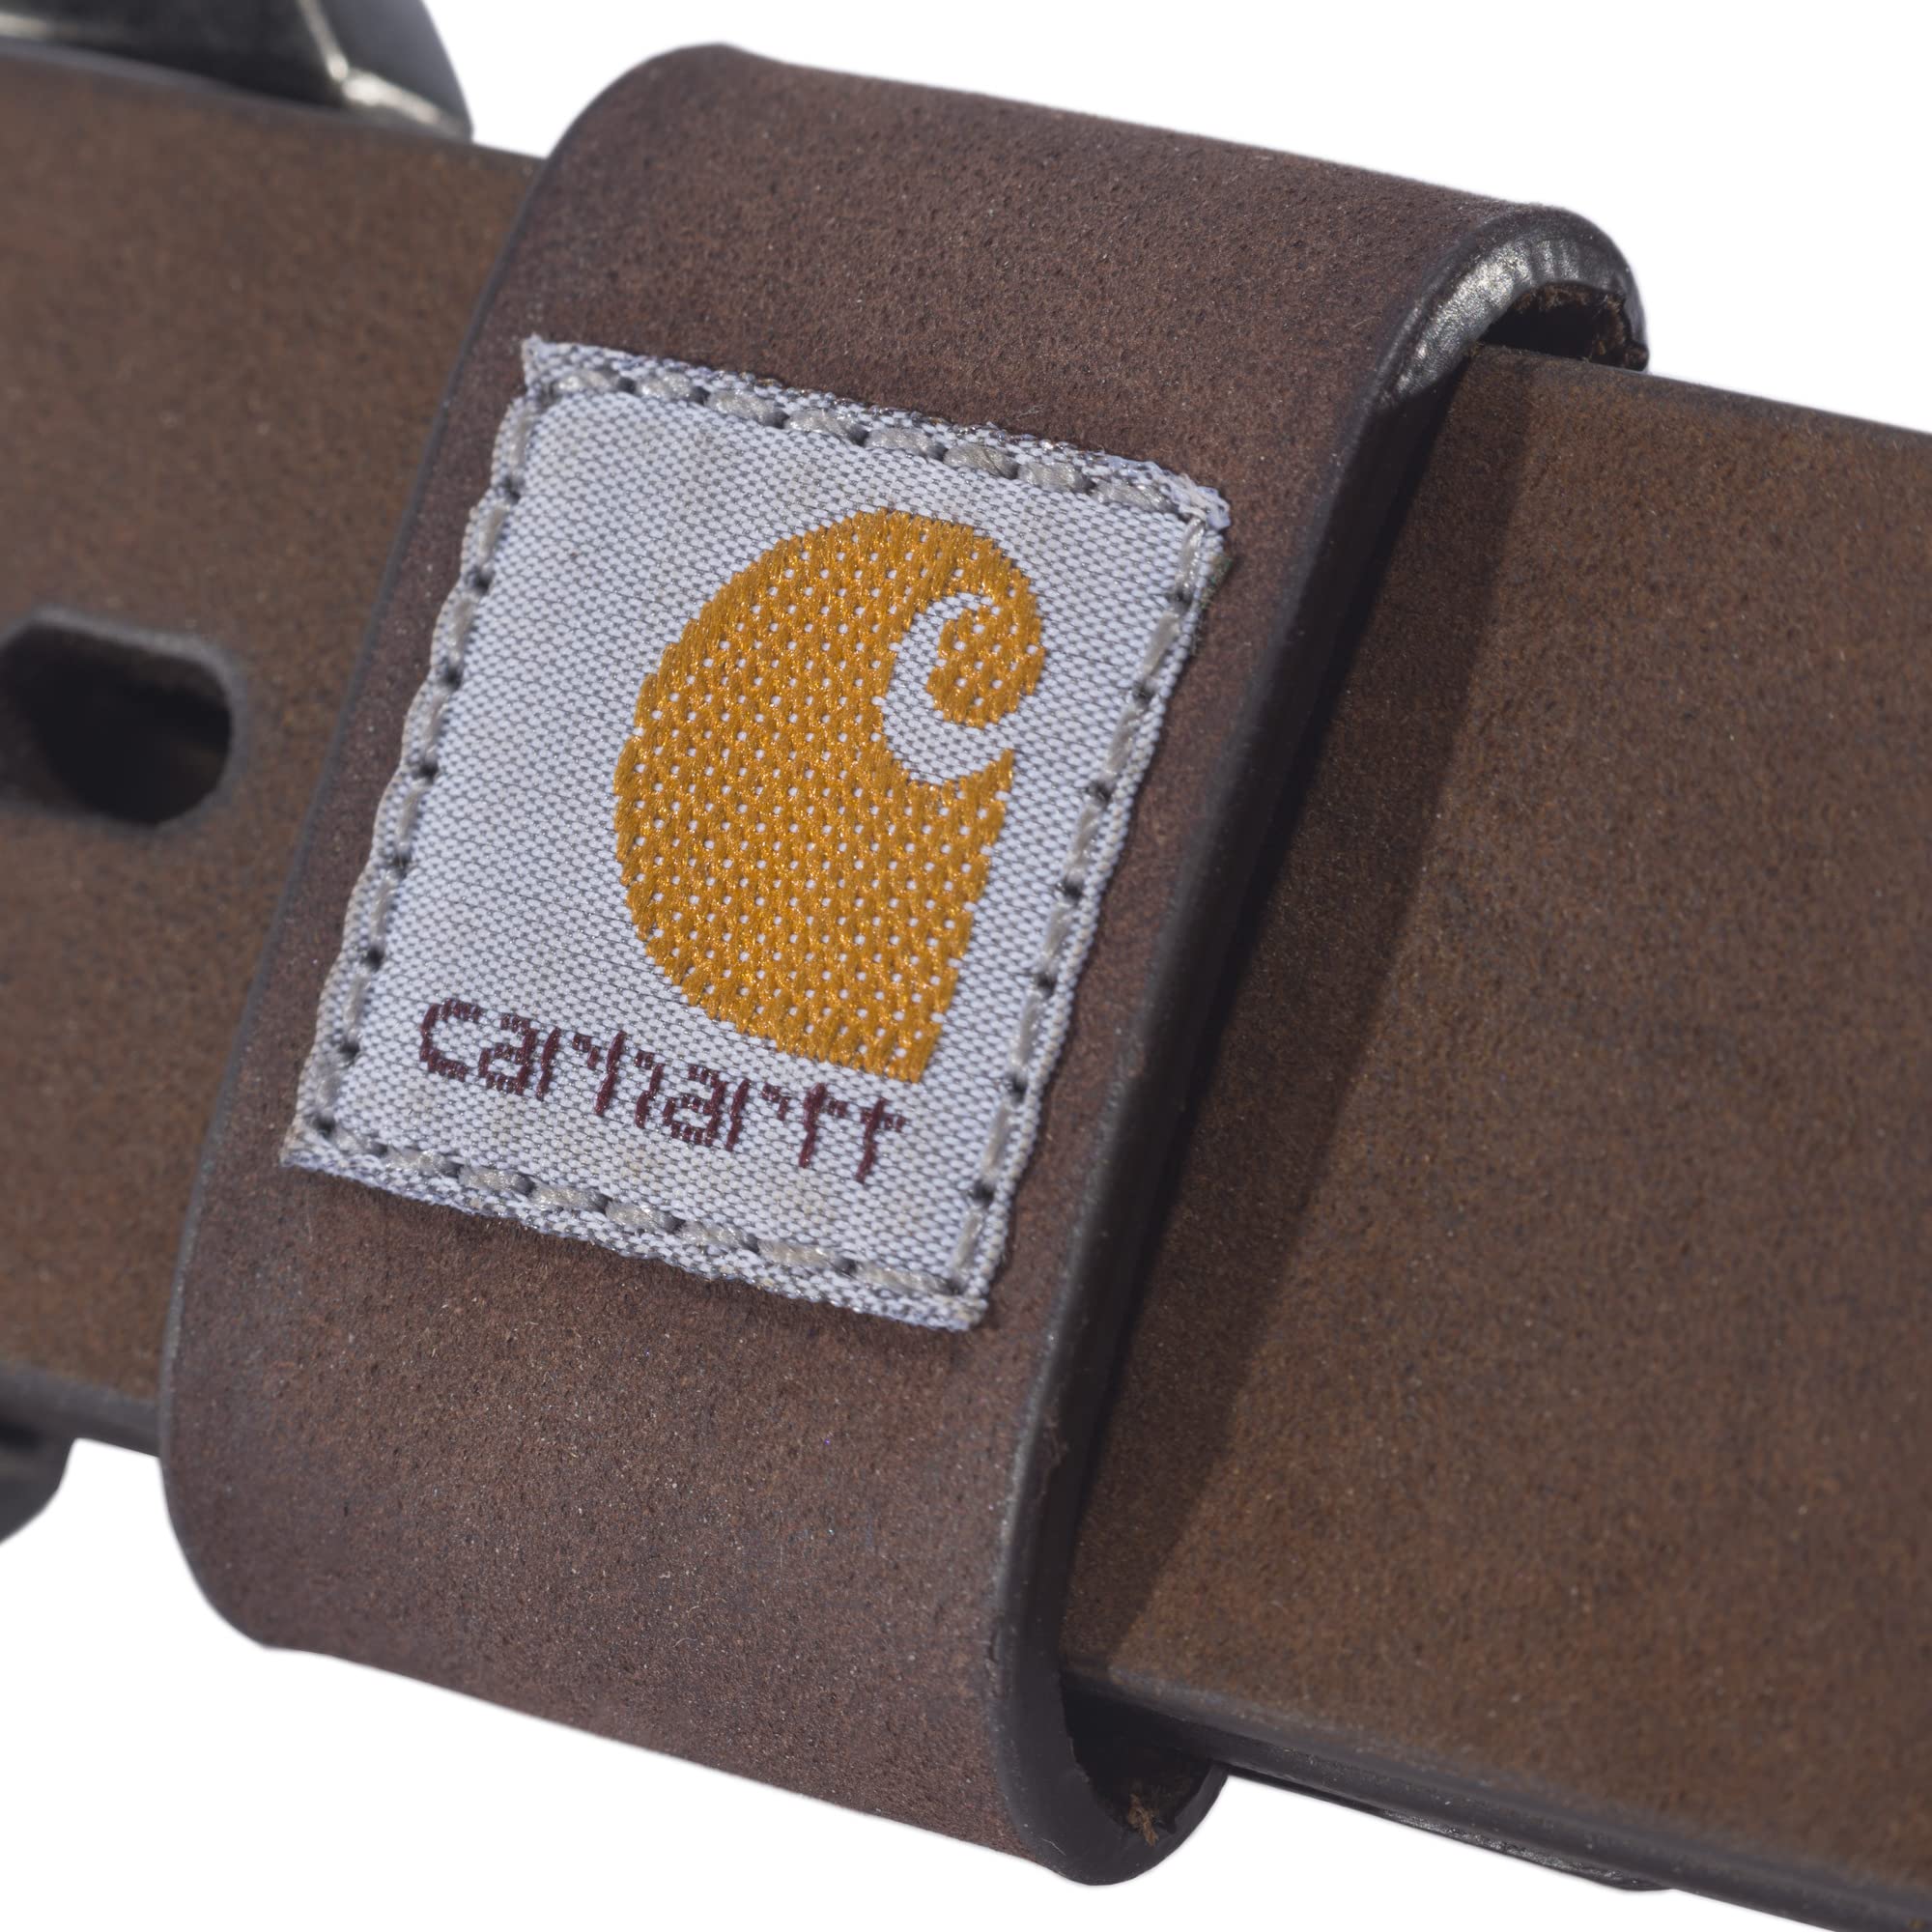 Carhartt Men's Casual Rugged Belts, Available in Multiple Styles, Colors & Sizes